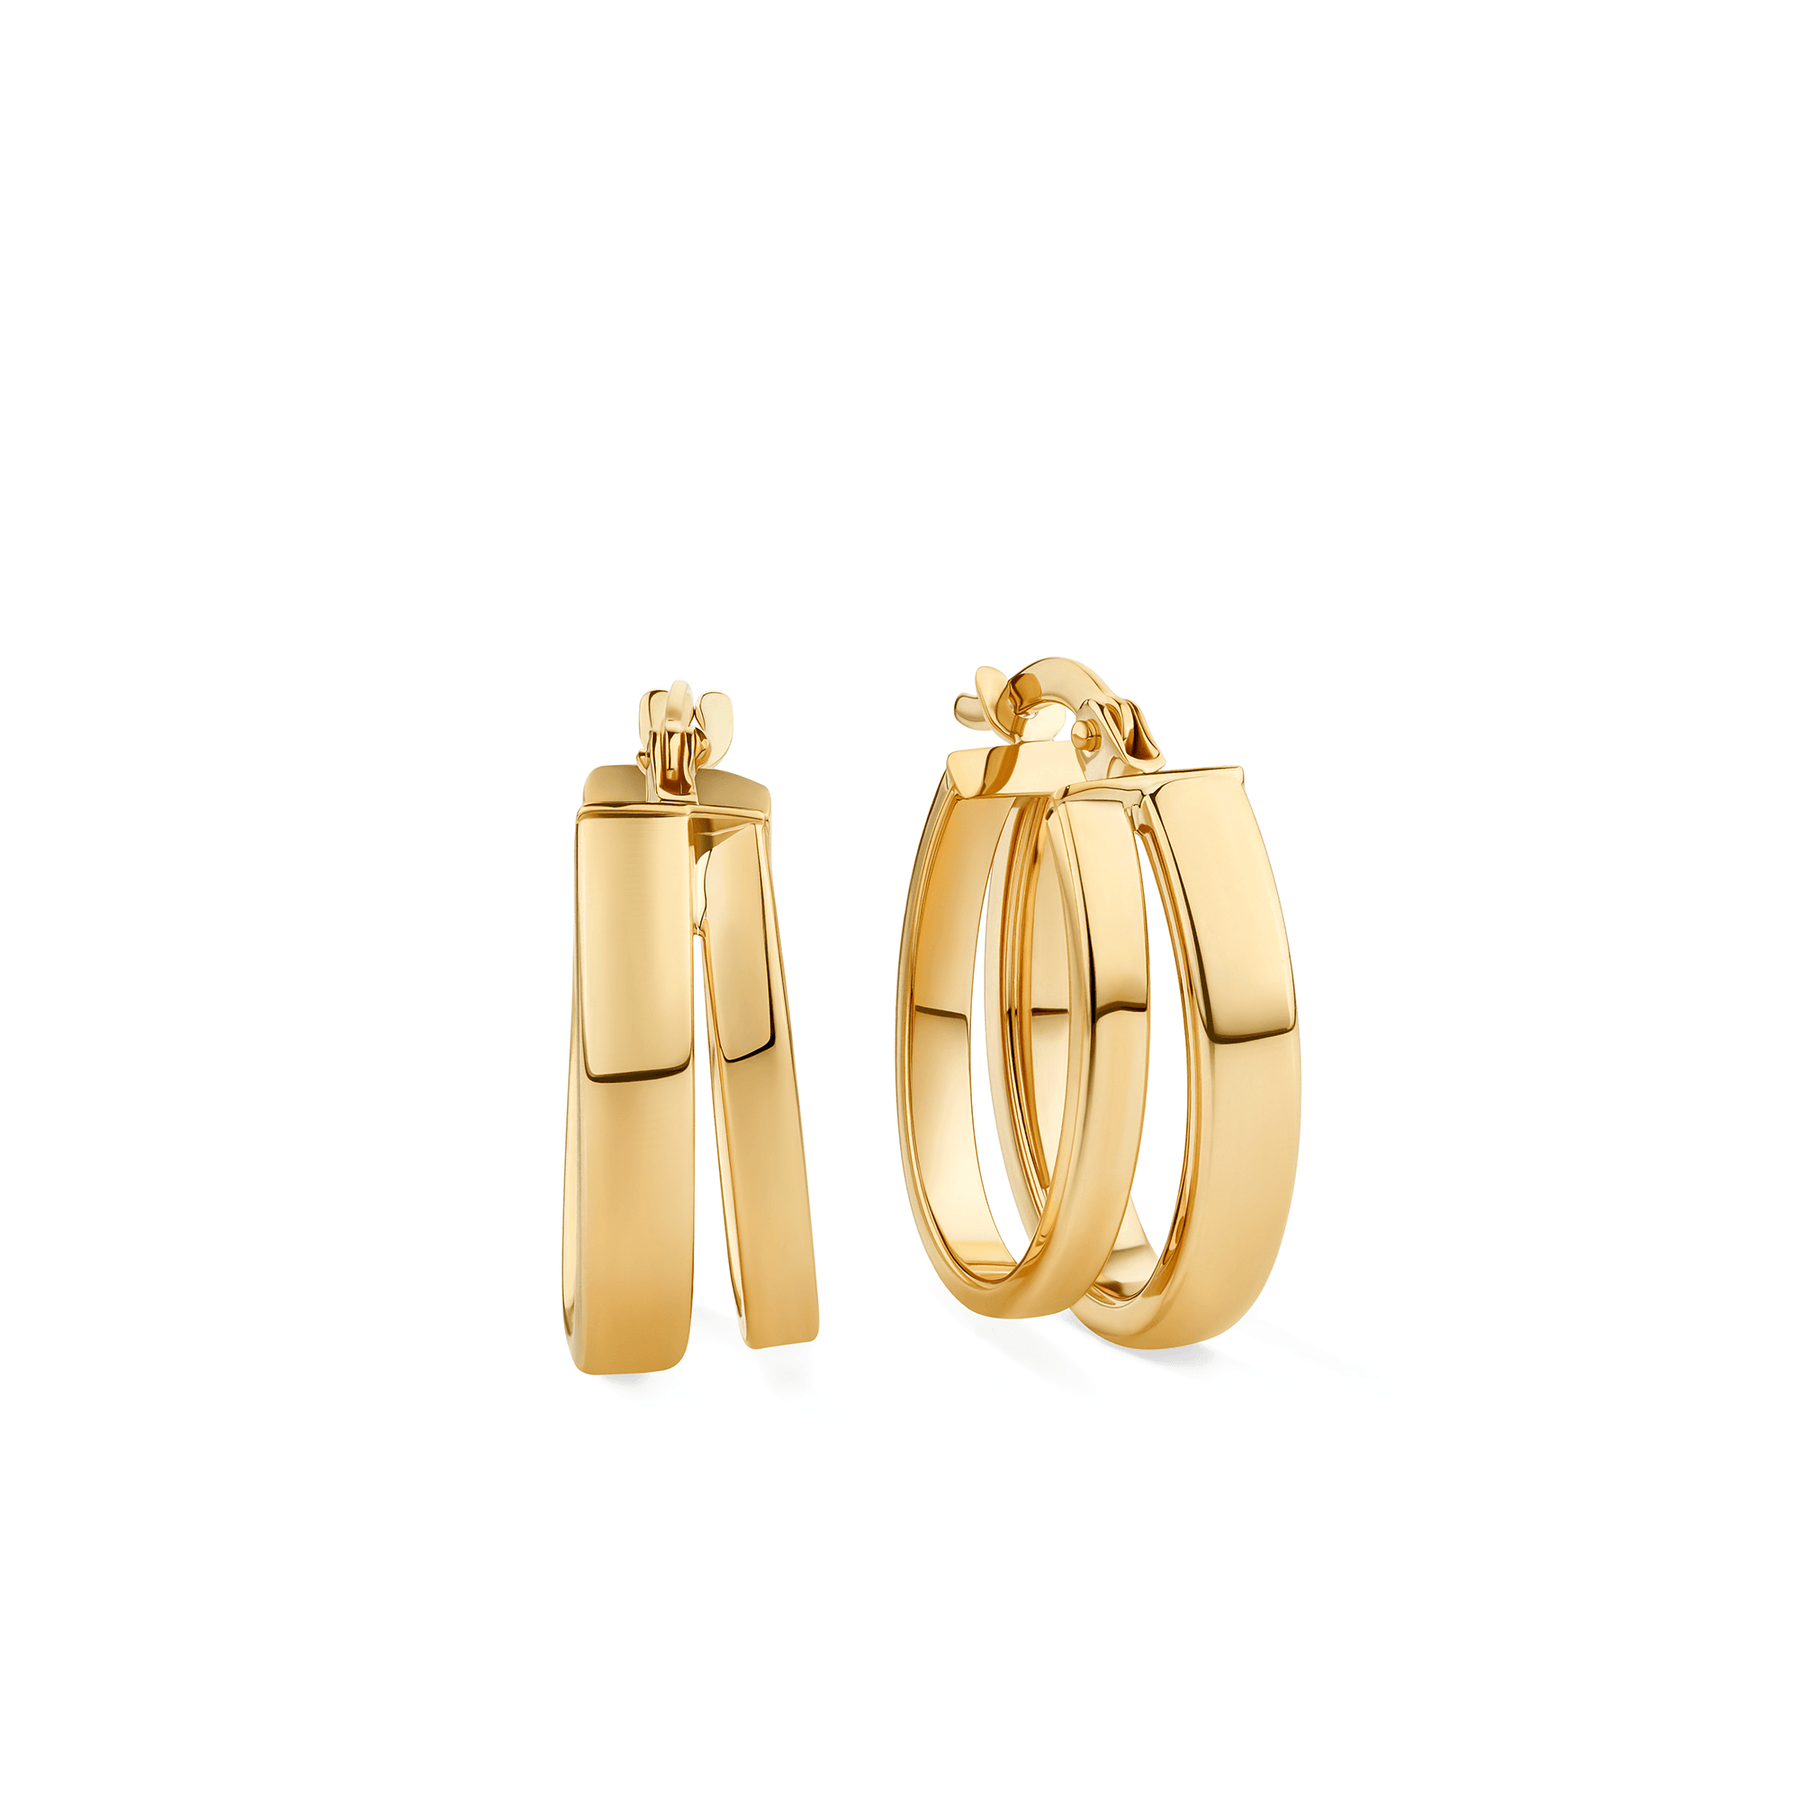 Double Hoop Earrings in 9ct Yellow Gold - Wallace Bishop